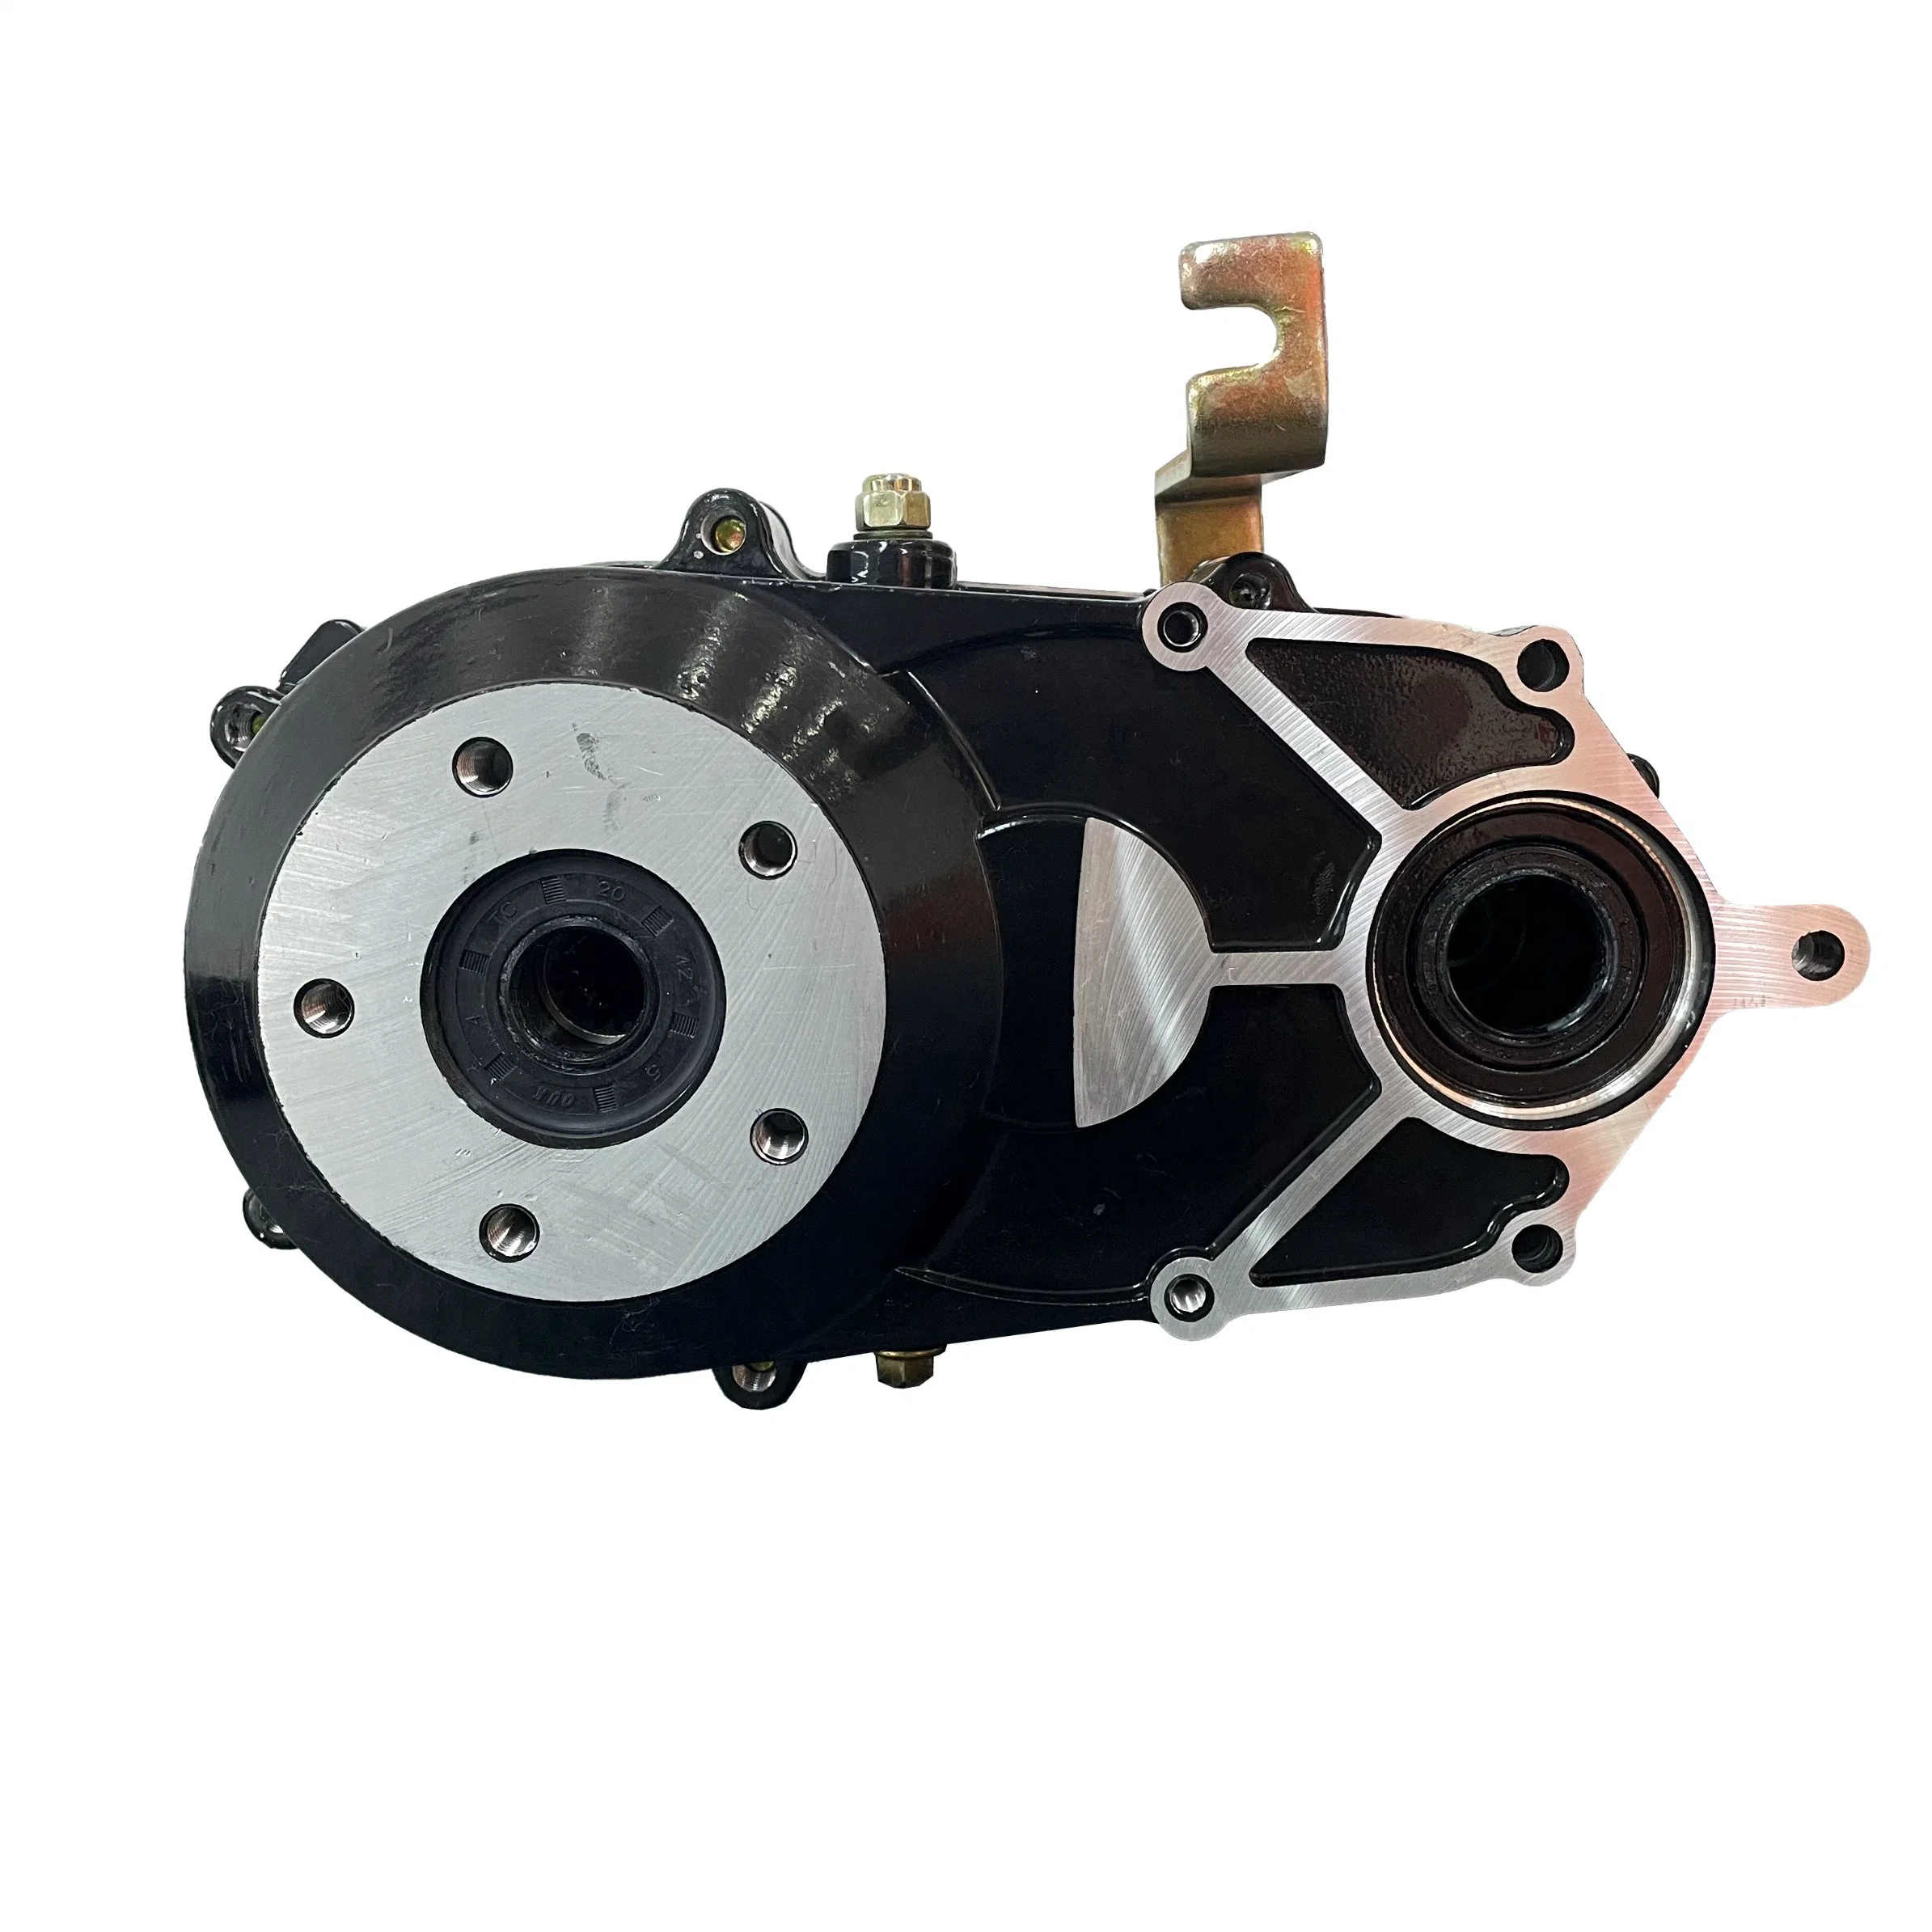 High quality/High cost performance  Gear Box for E-Bike Electric Vehicle Two Speed and Single Speed Motor Gear Box